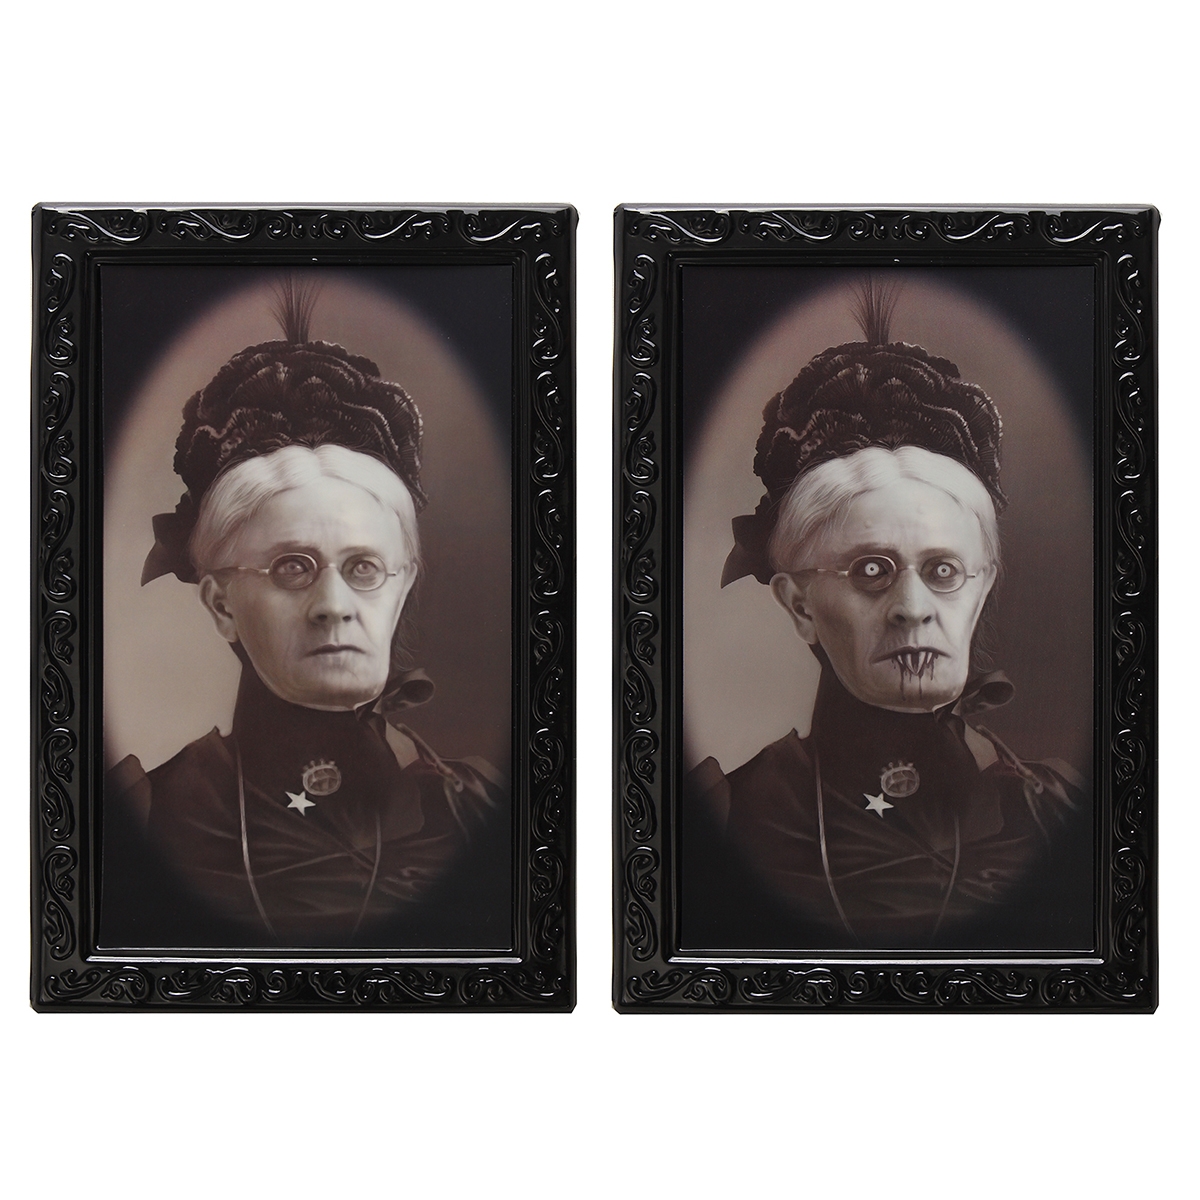 Hallowmas Lenticular 3D Changing Face Horror Portrait Haunted Spooky Decorations